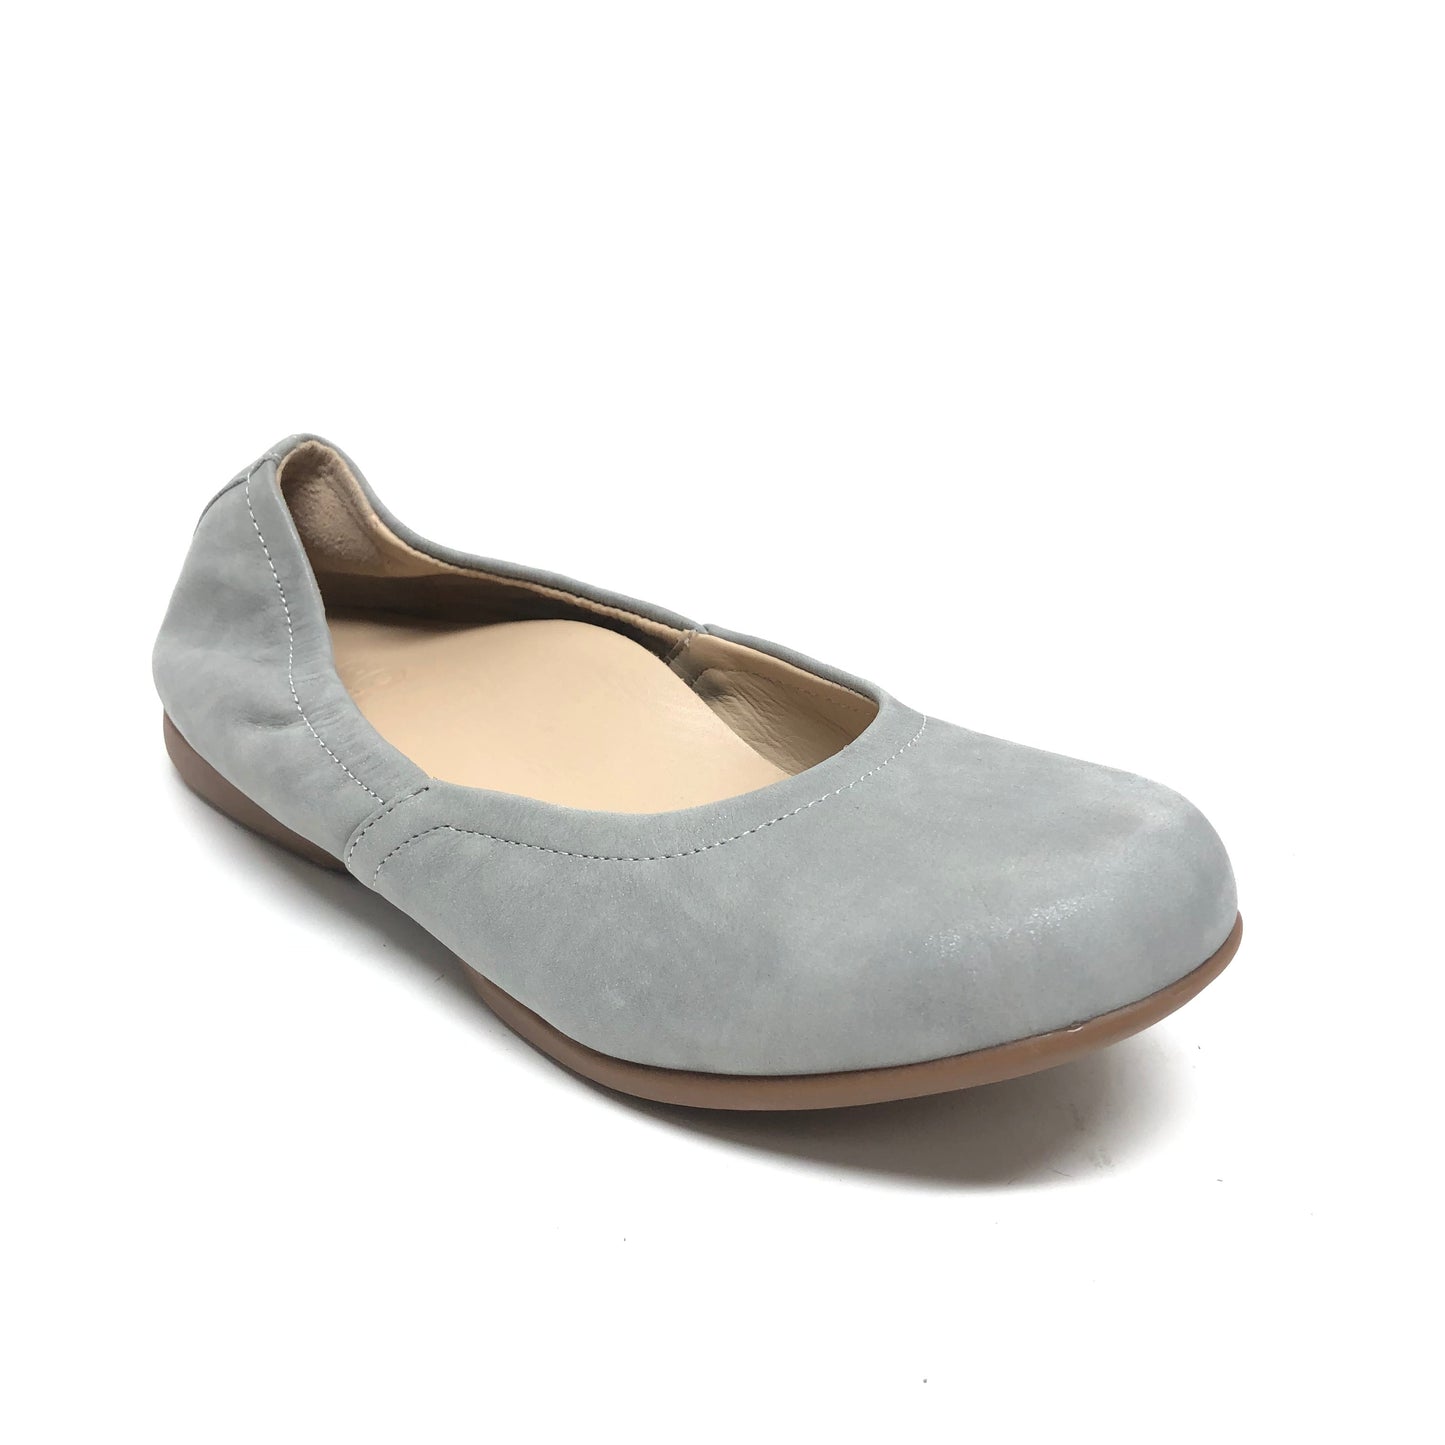 Shoes Flats By Abeo  Size: 7.5